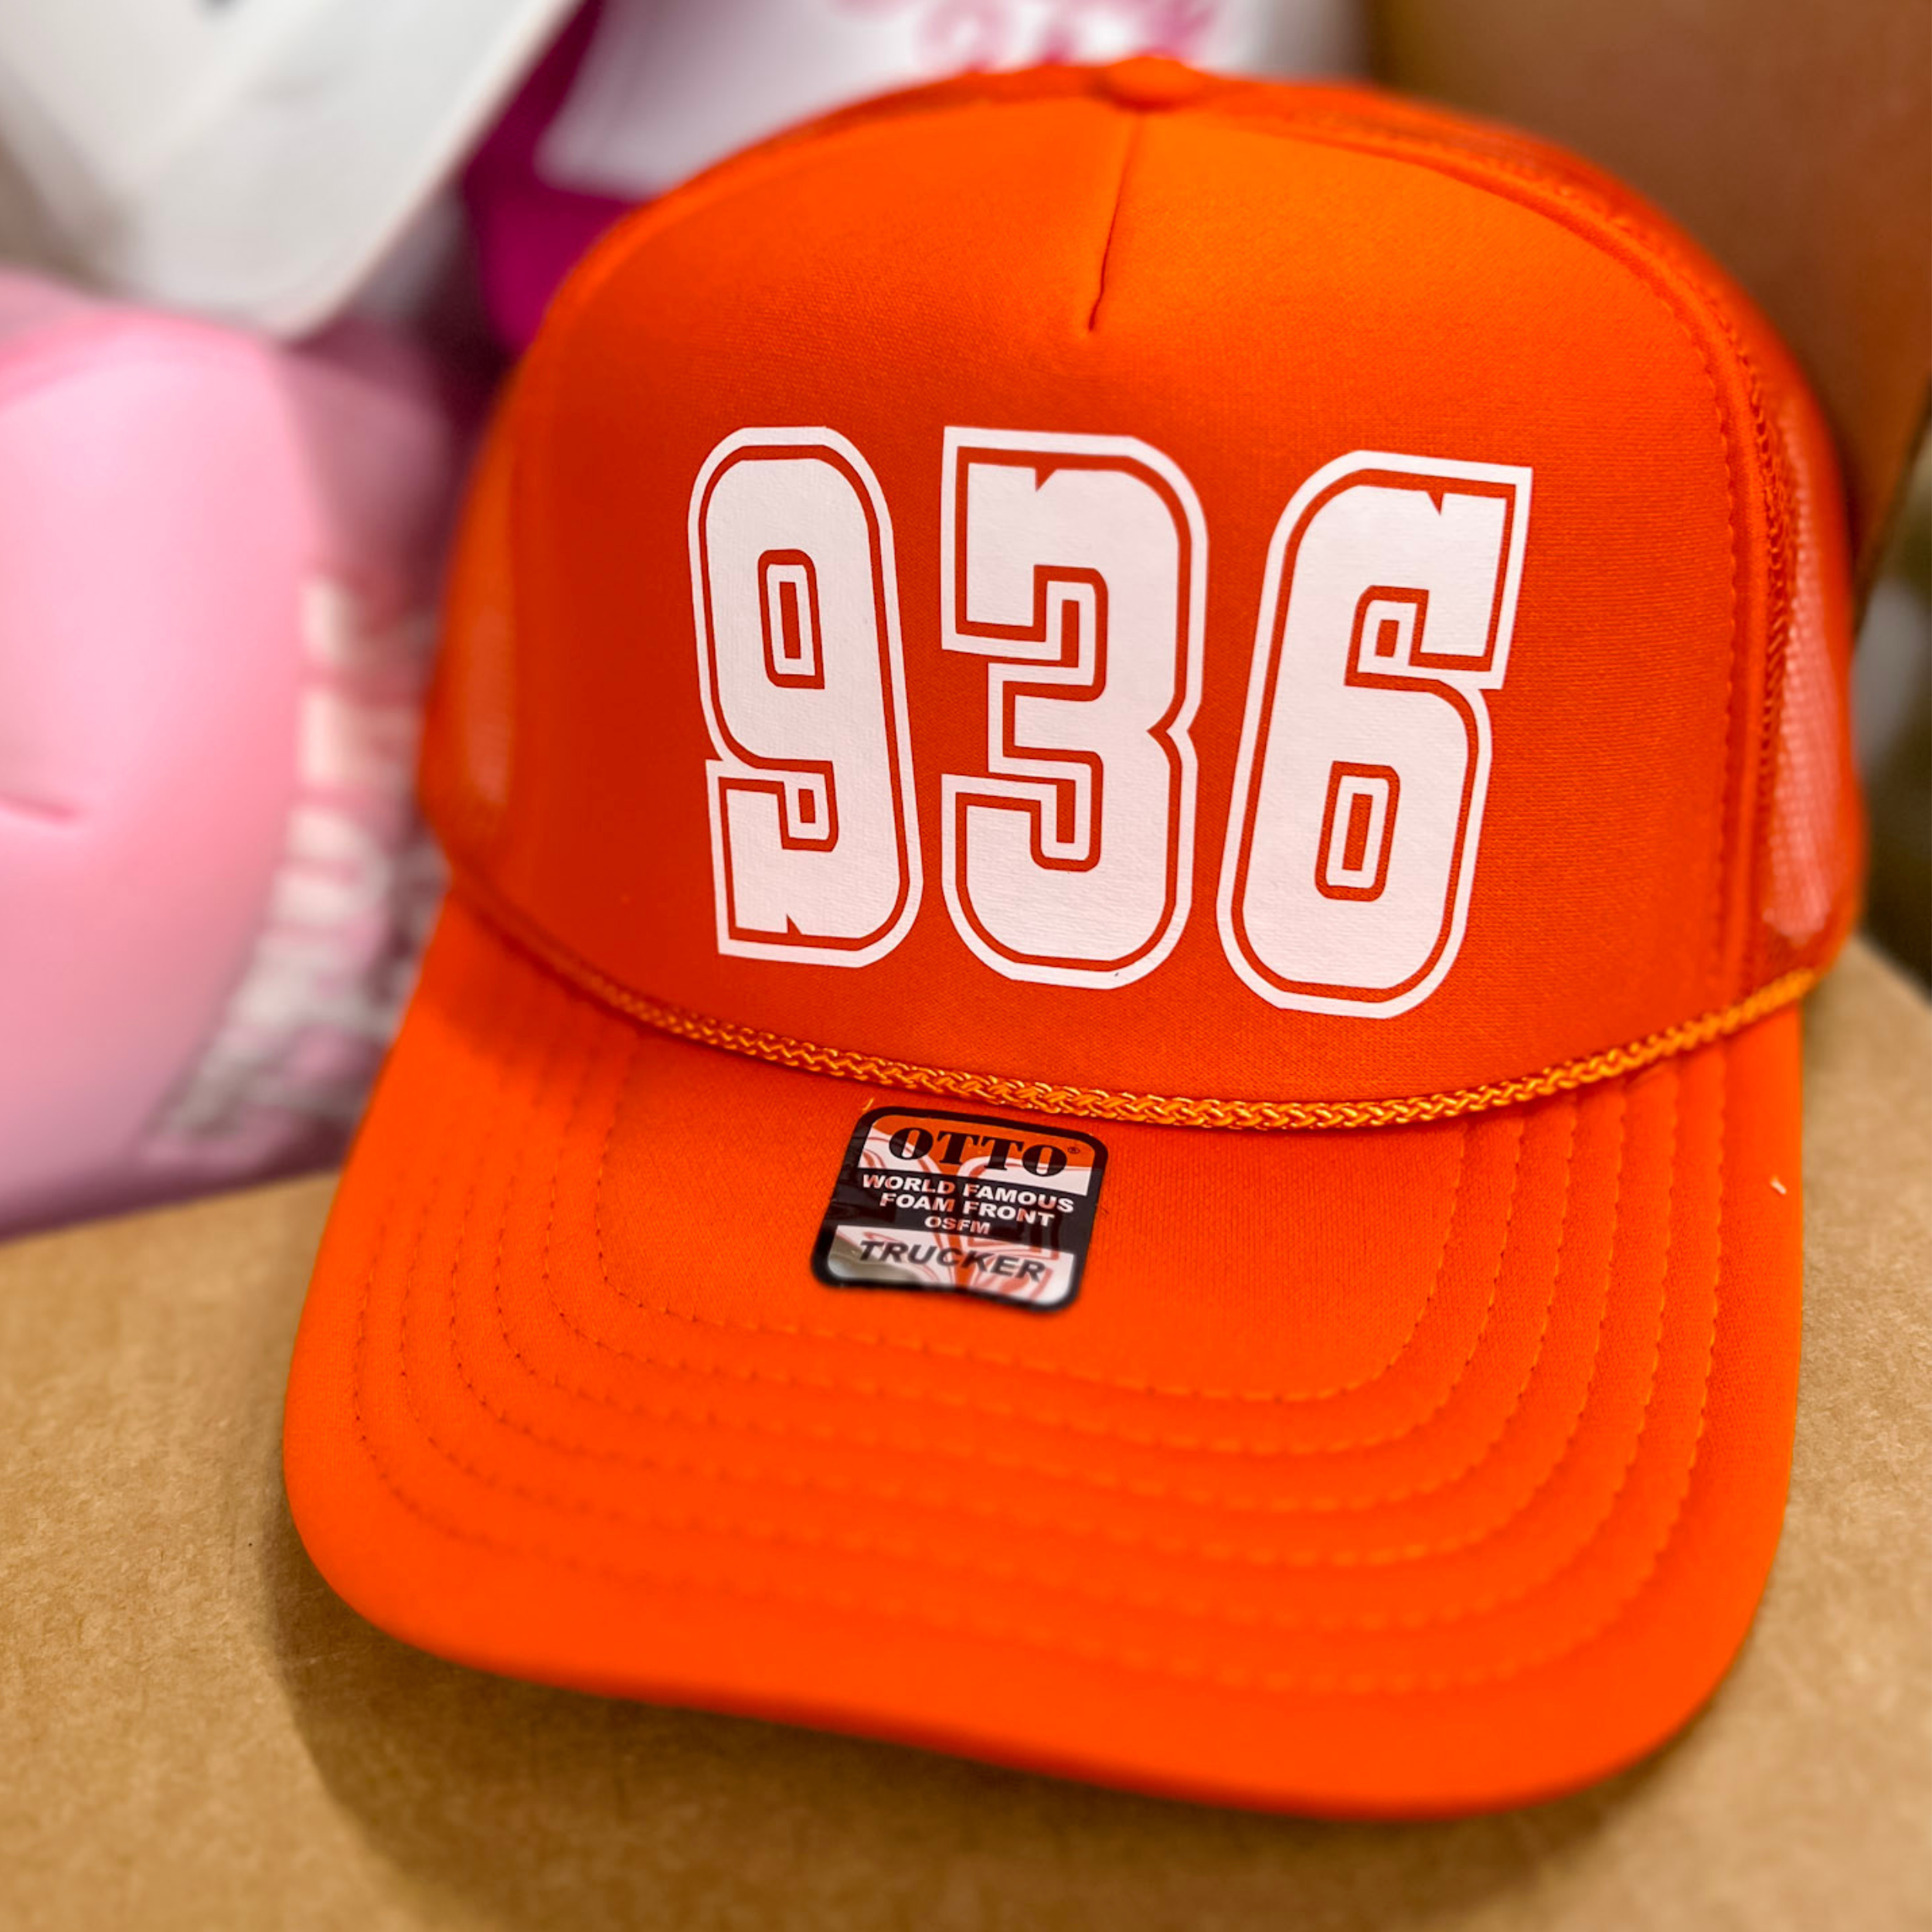 Photo features an orange trucker hat with the letters 936 in large white font on the front.